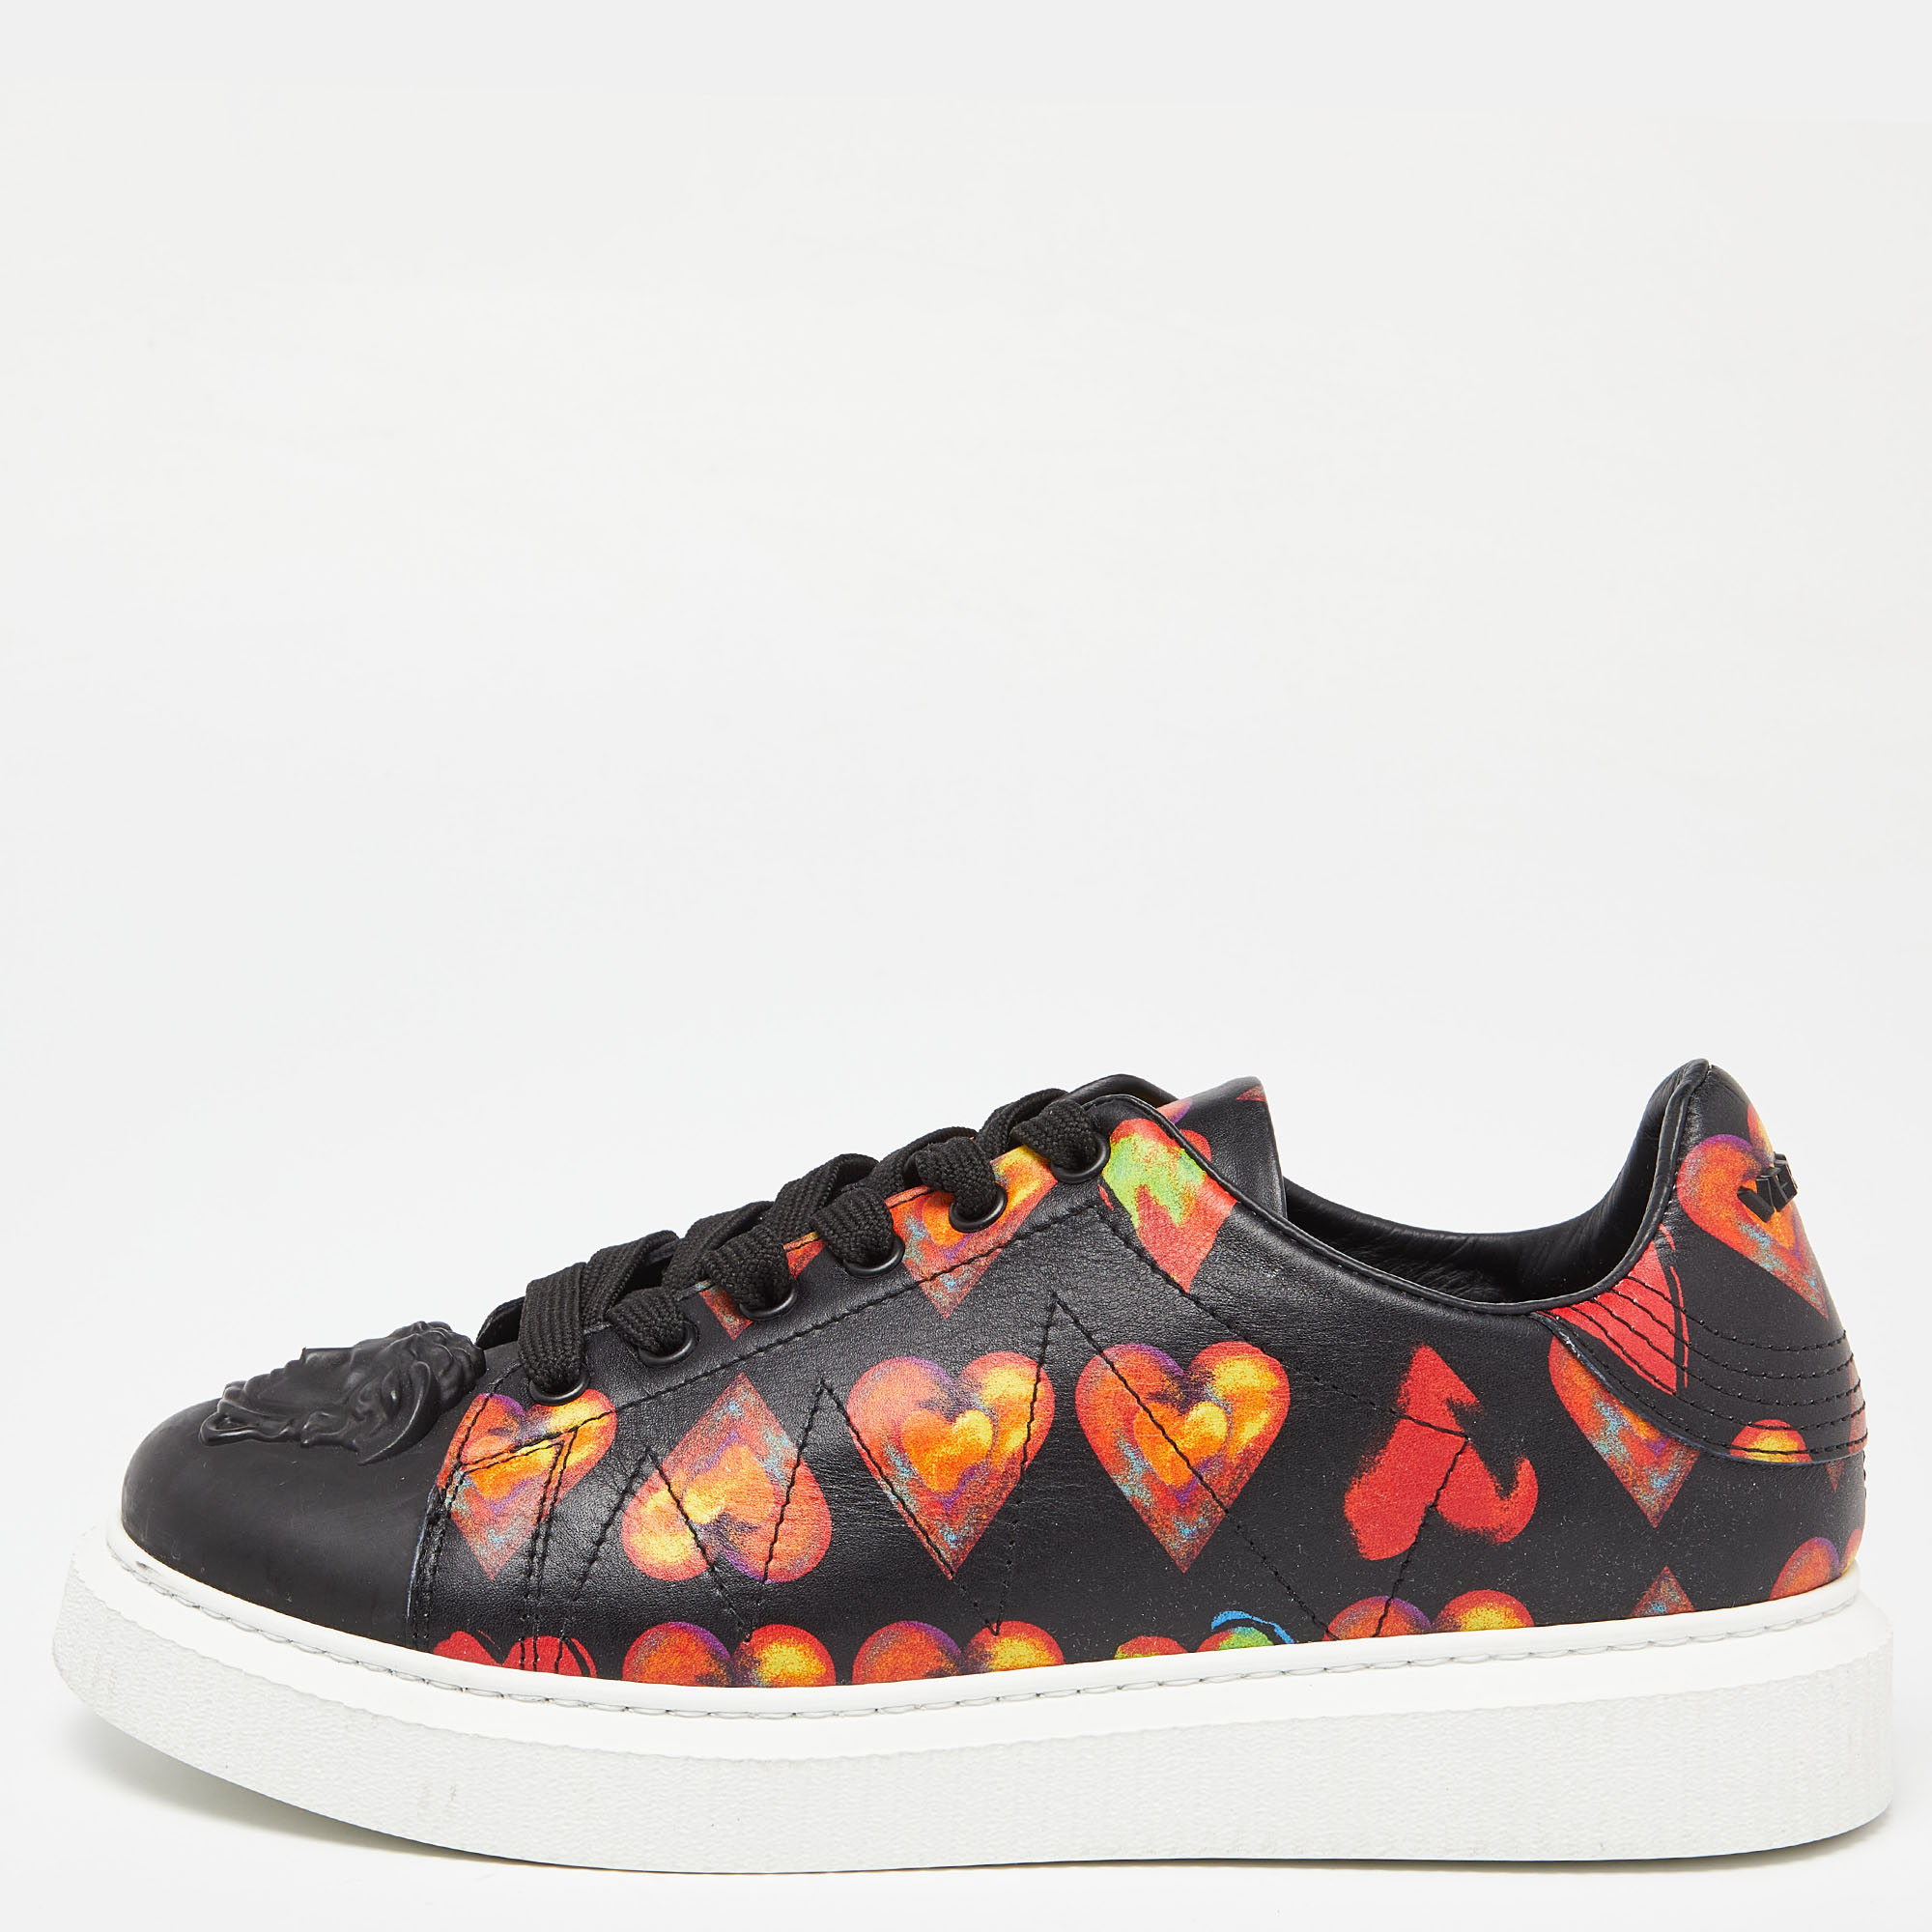 Versace Black Heart Printed Leather Medusa Sneakers Size 39